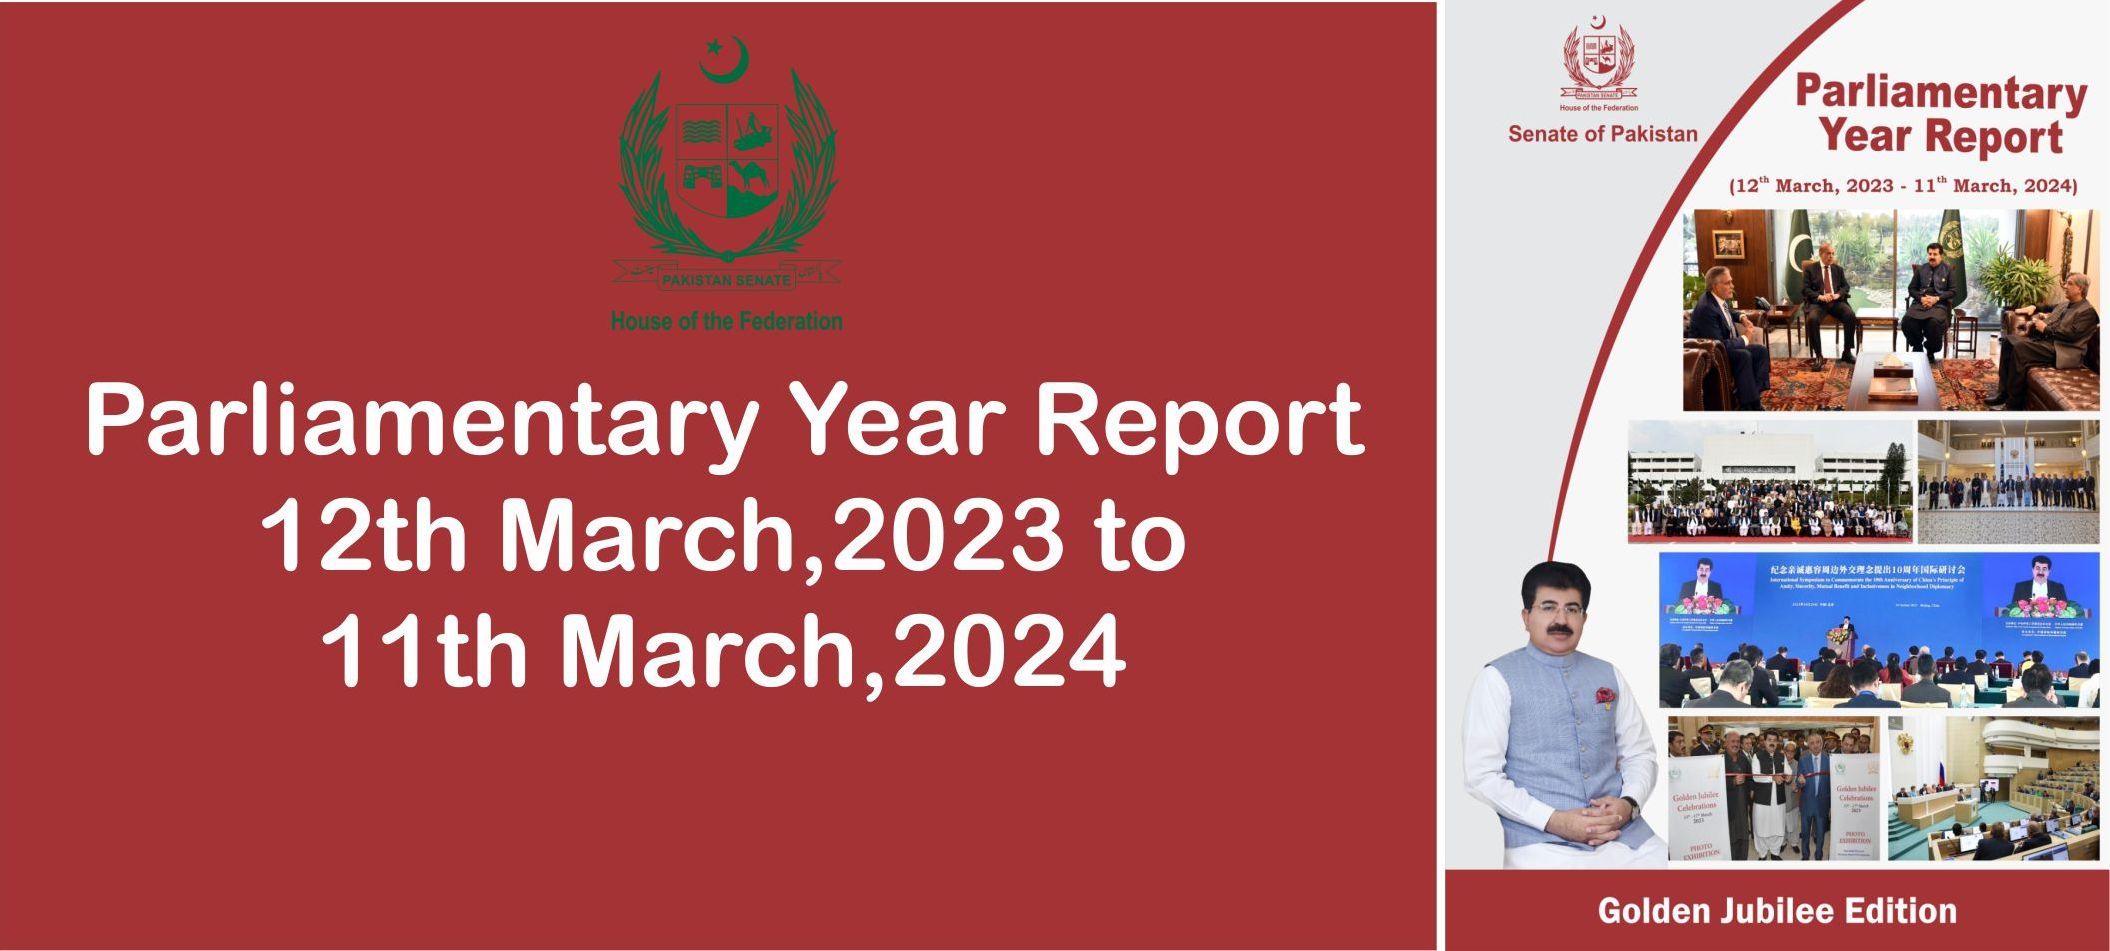 Senate of Pakistan Unveils Annual Parliamentary Year Report 2023-24, Showcasing Remarkable Achievements